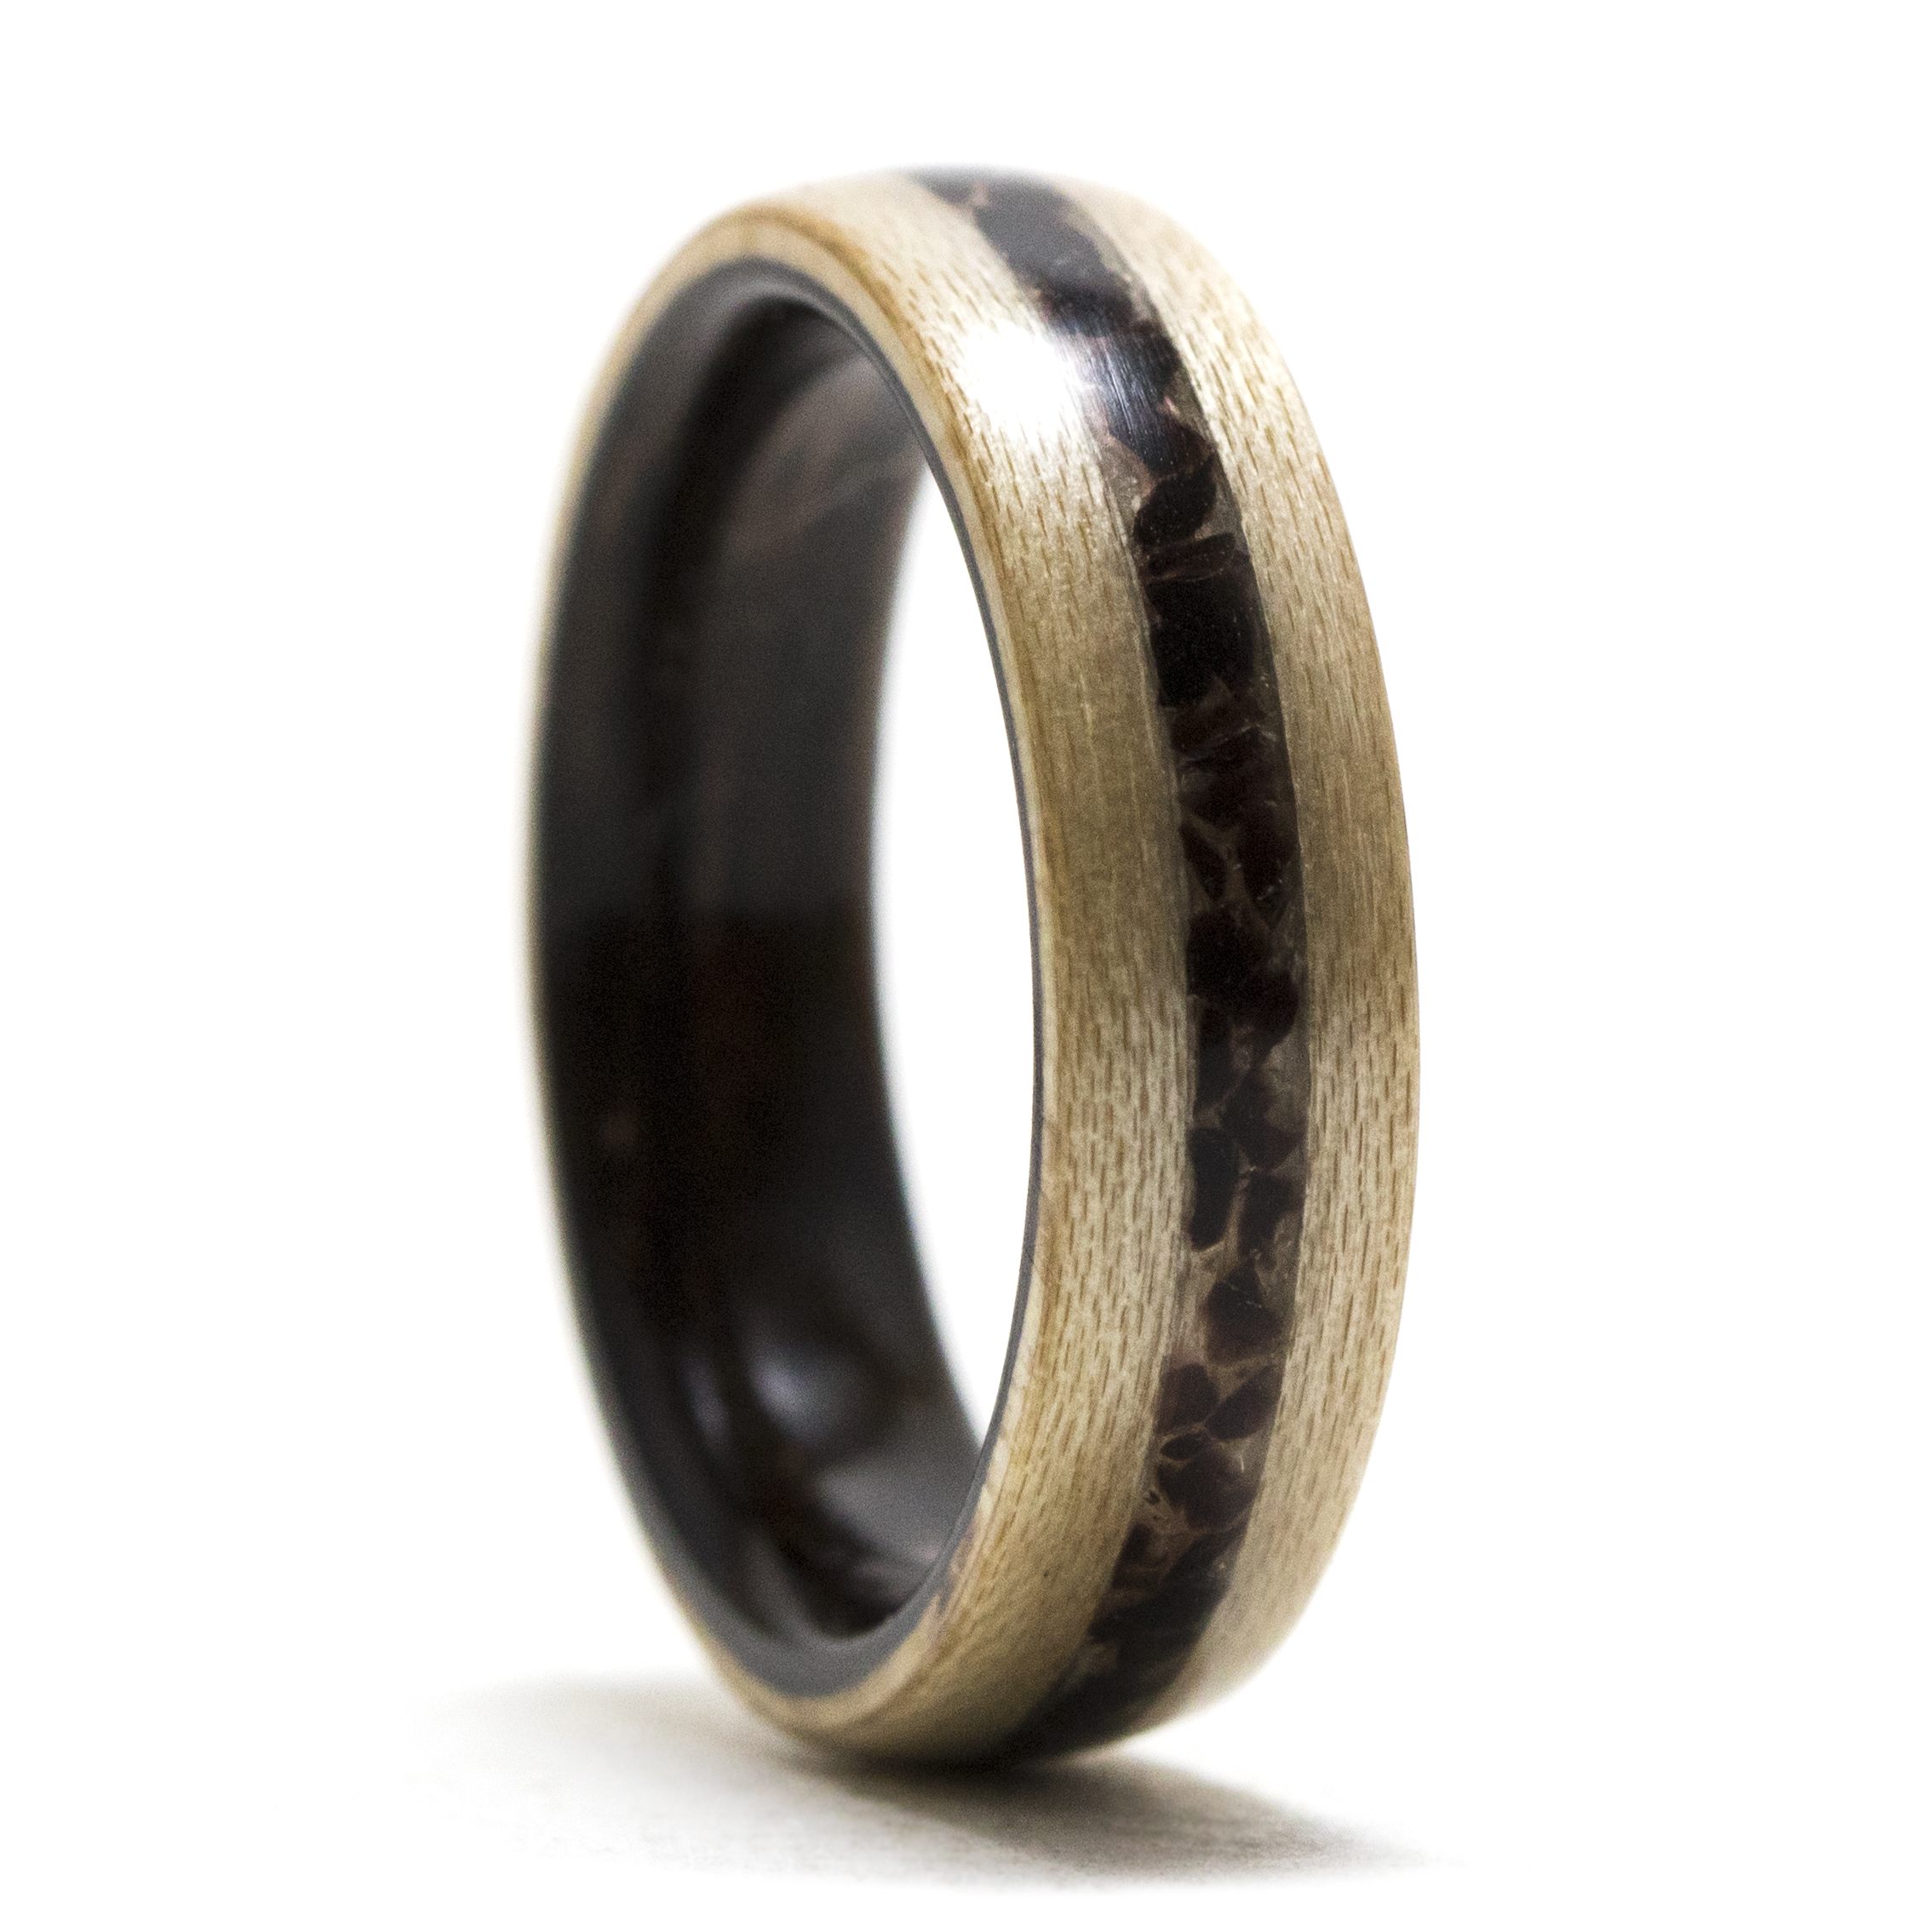 Maple Wood Ring Lined With Ebony And Obsidian Inlay - Size 9 - Warren Rings